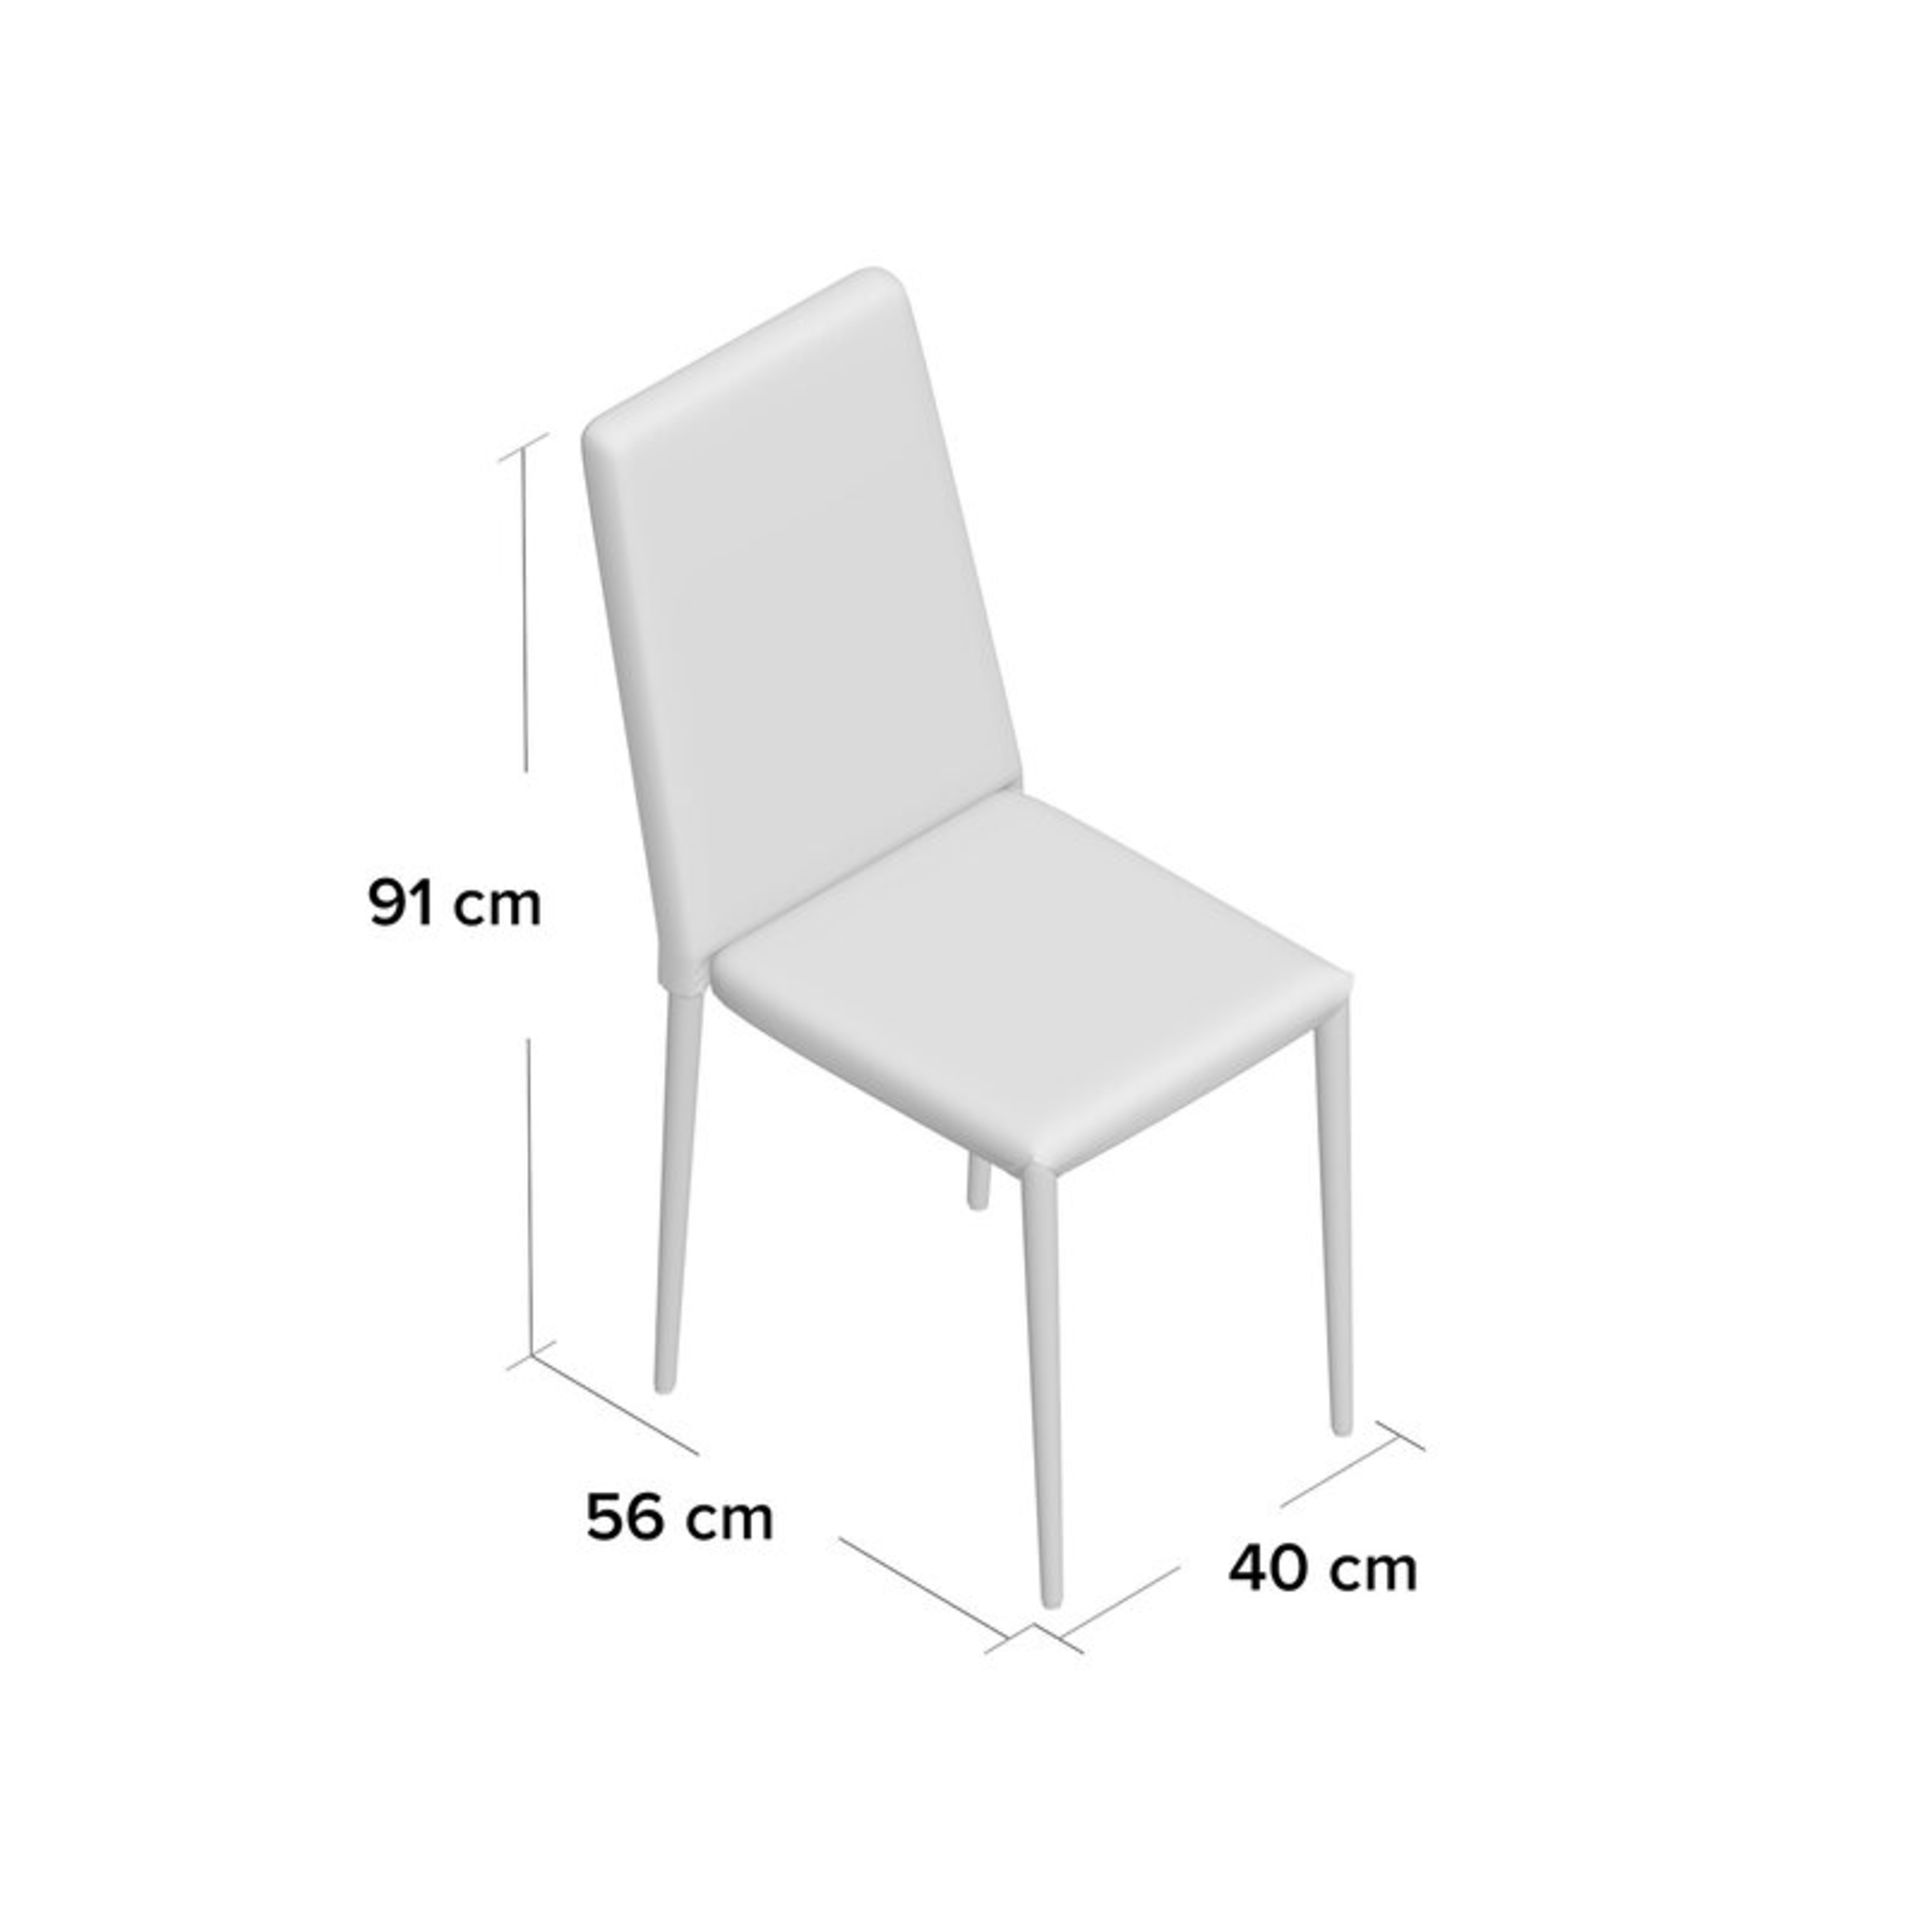 Hashtag Home Earnest Armless Stacking Chair - Image 2 of 4